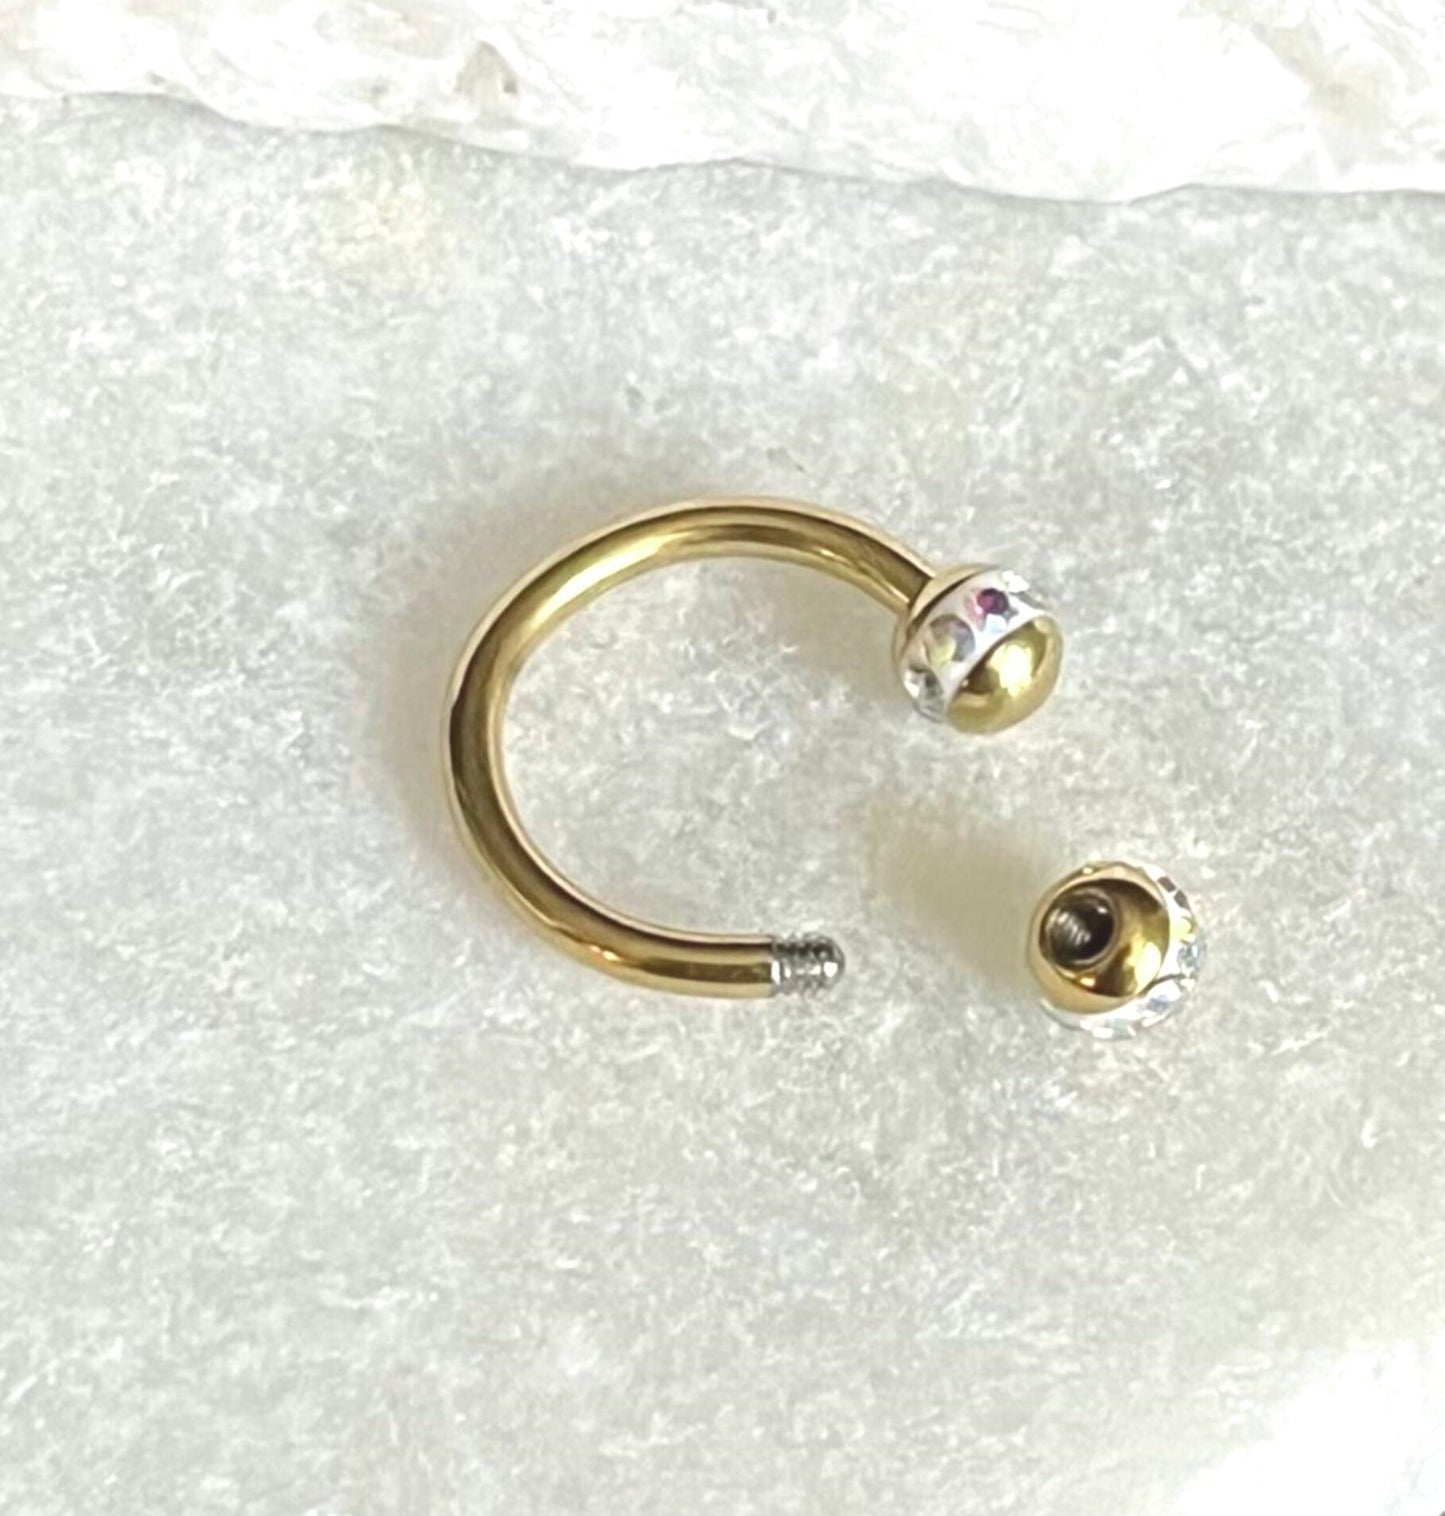 1 Piece Stunning Crystal Paved Gold Circular Horseshoe Septum Ring - 16g, 8mm - Aurora Borealis, Clear, Pink, Aqua or Red Available!